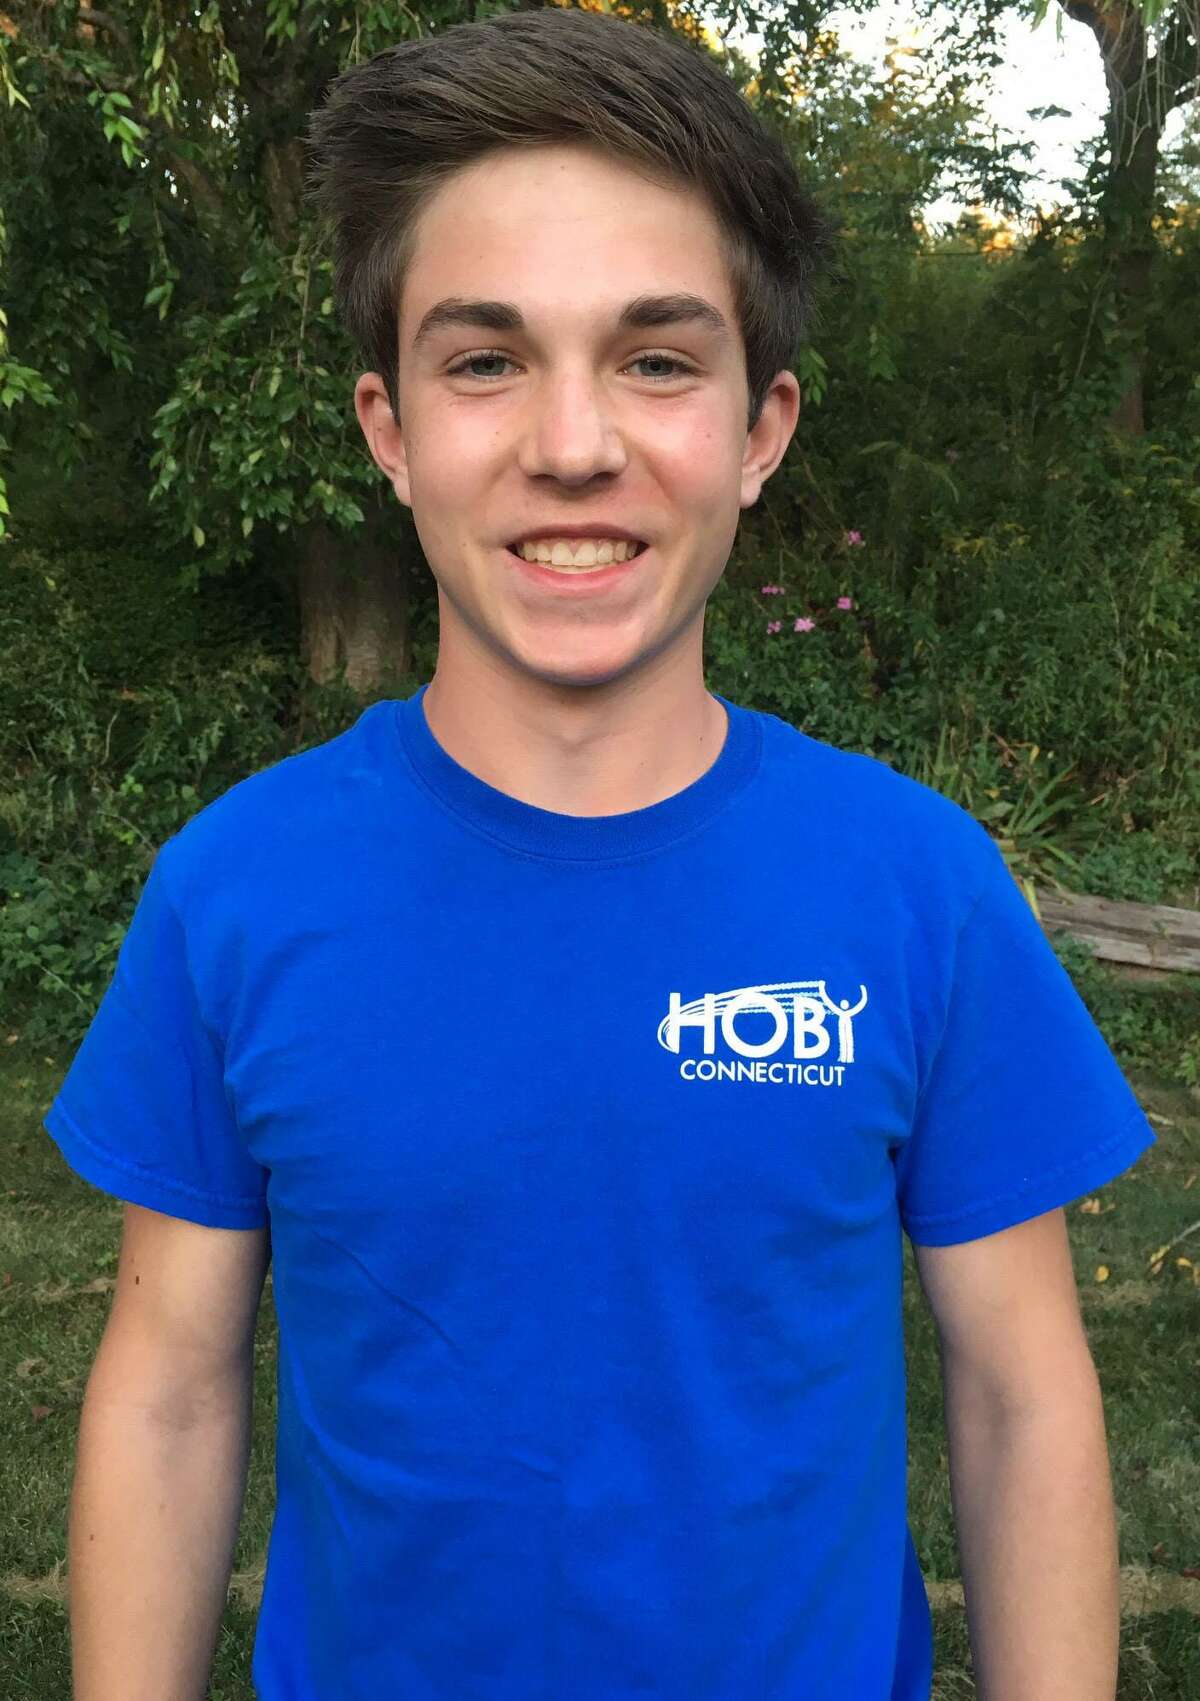 New Milford resident Gregory Winkelstern is gearing up to attend the HOBYs Advanced Leadership Academy this summer. He is a junior at New Milford High School.